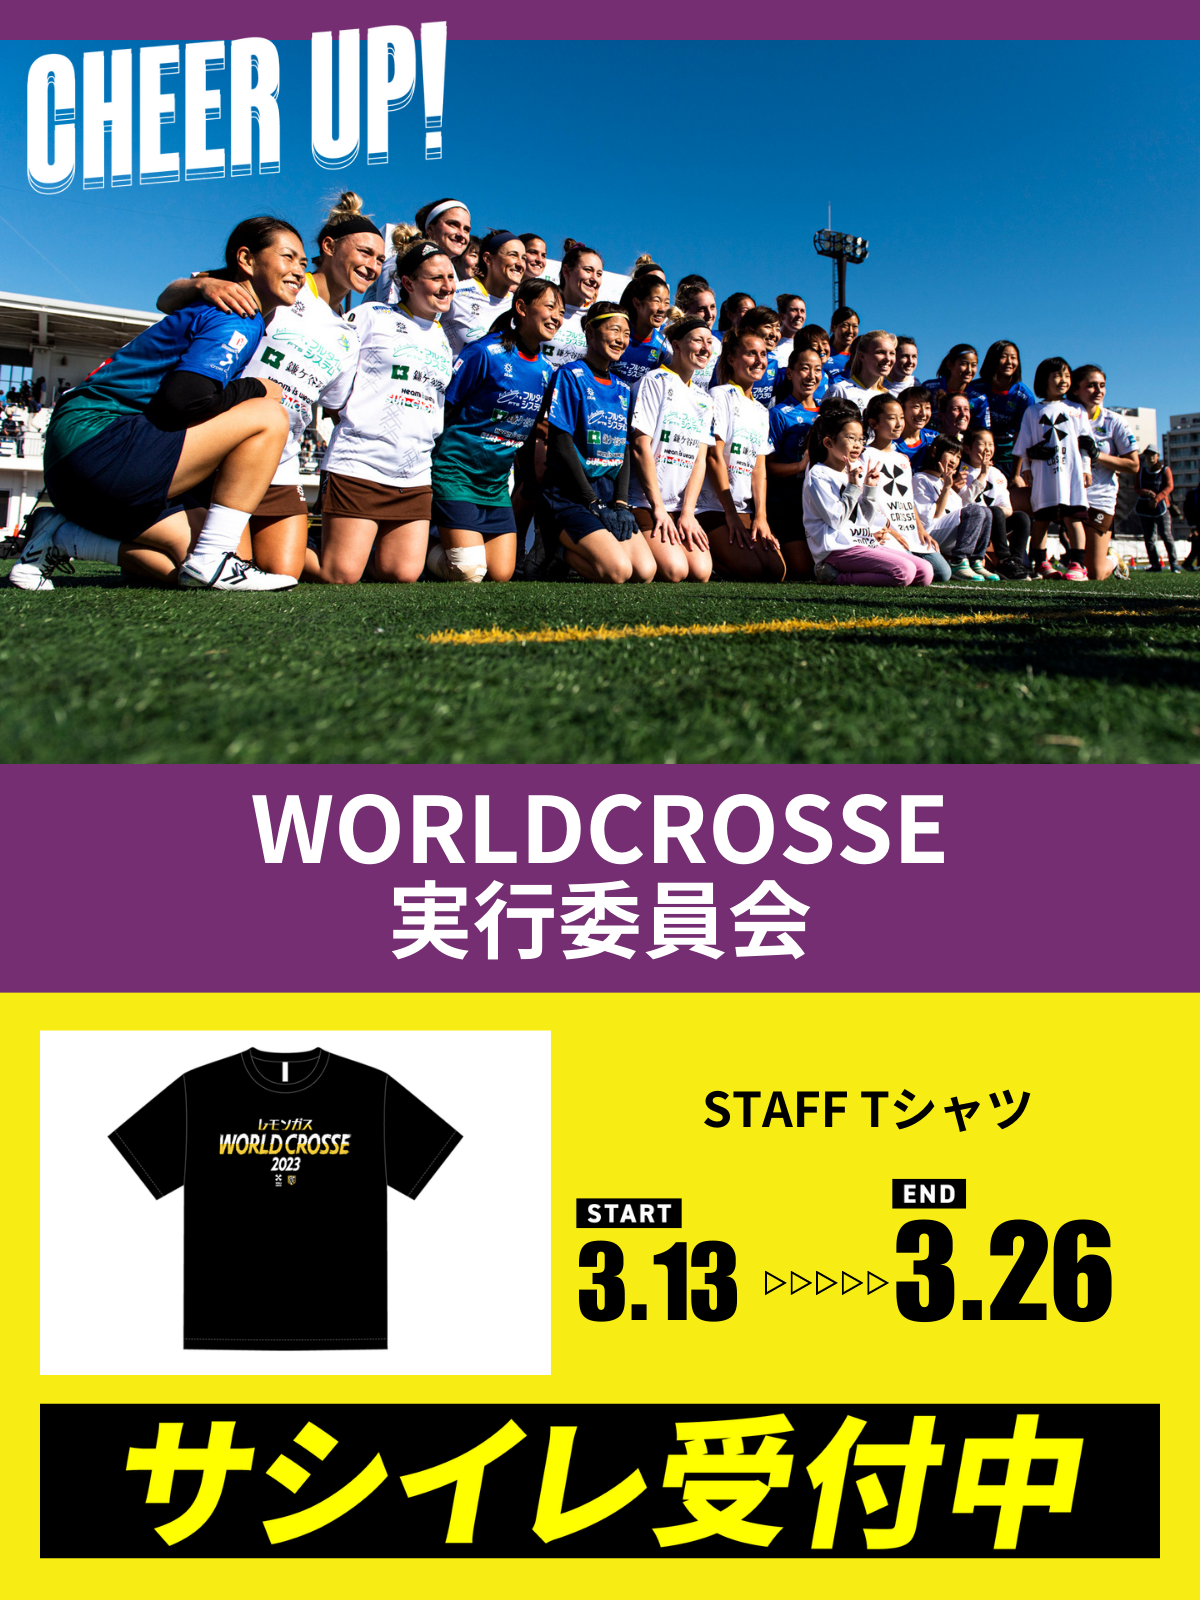 CHEER UP! for WORLDCROSSE実行委員会